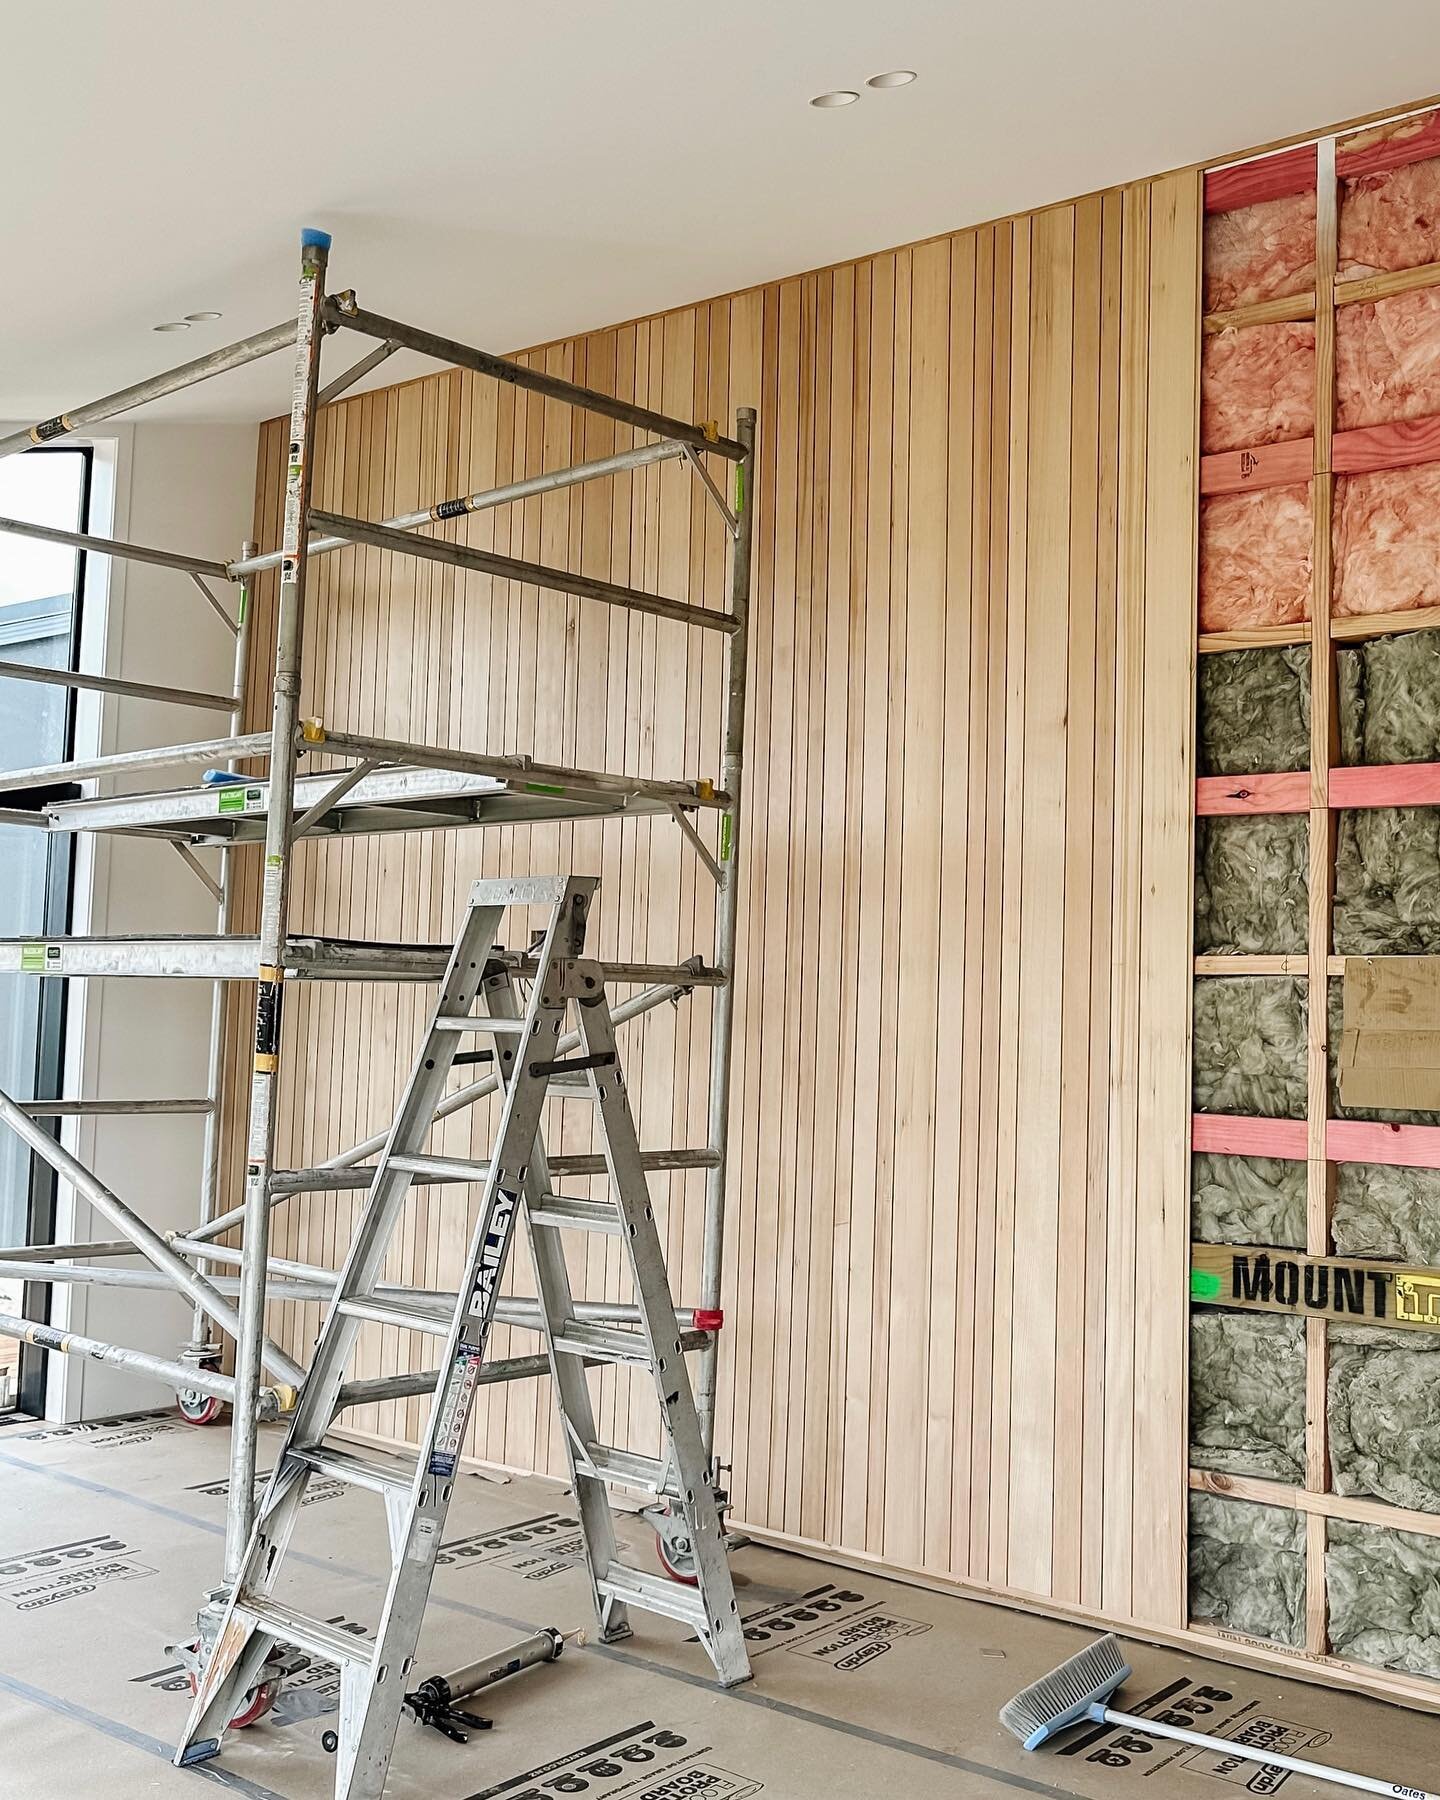 Feeling very happy with the results of @hermpac mixed panel in beautiful variations of Ashin. 
This panel plus another has been specified as feature walls throughout our Papamoa project - near completion!! 

Construction and careful layout of panels 